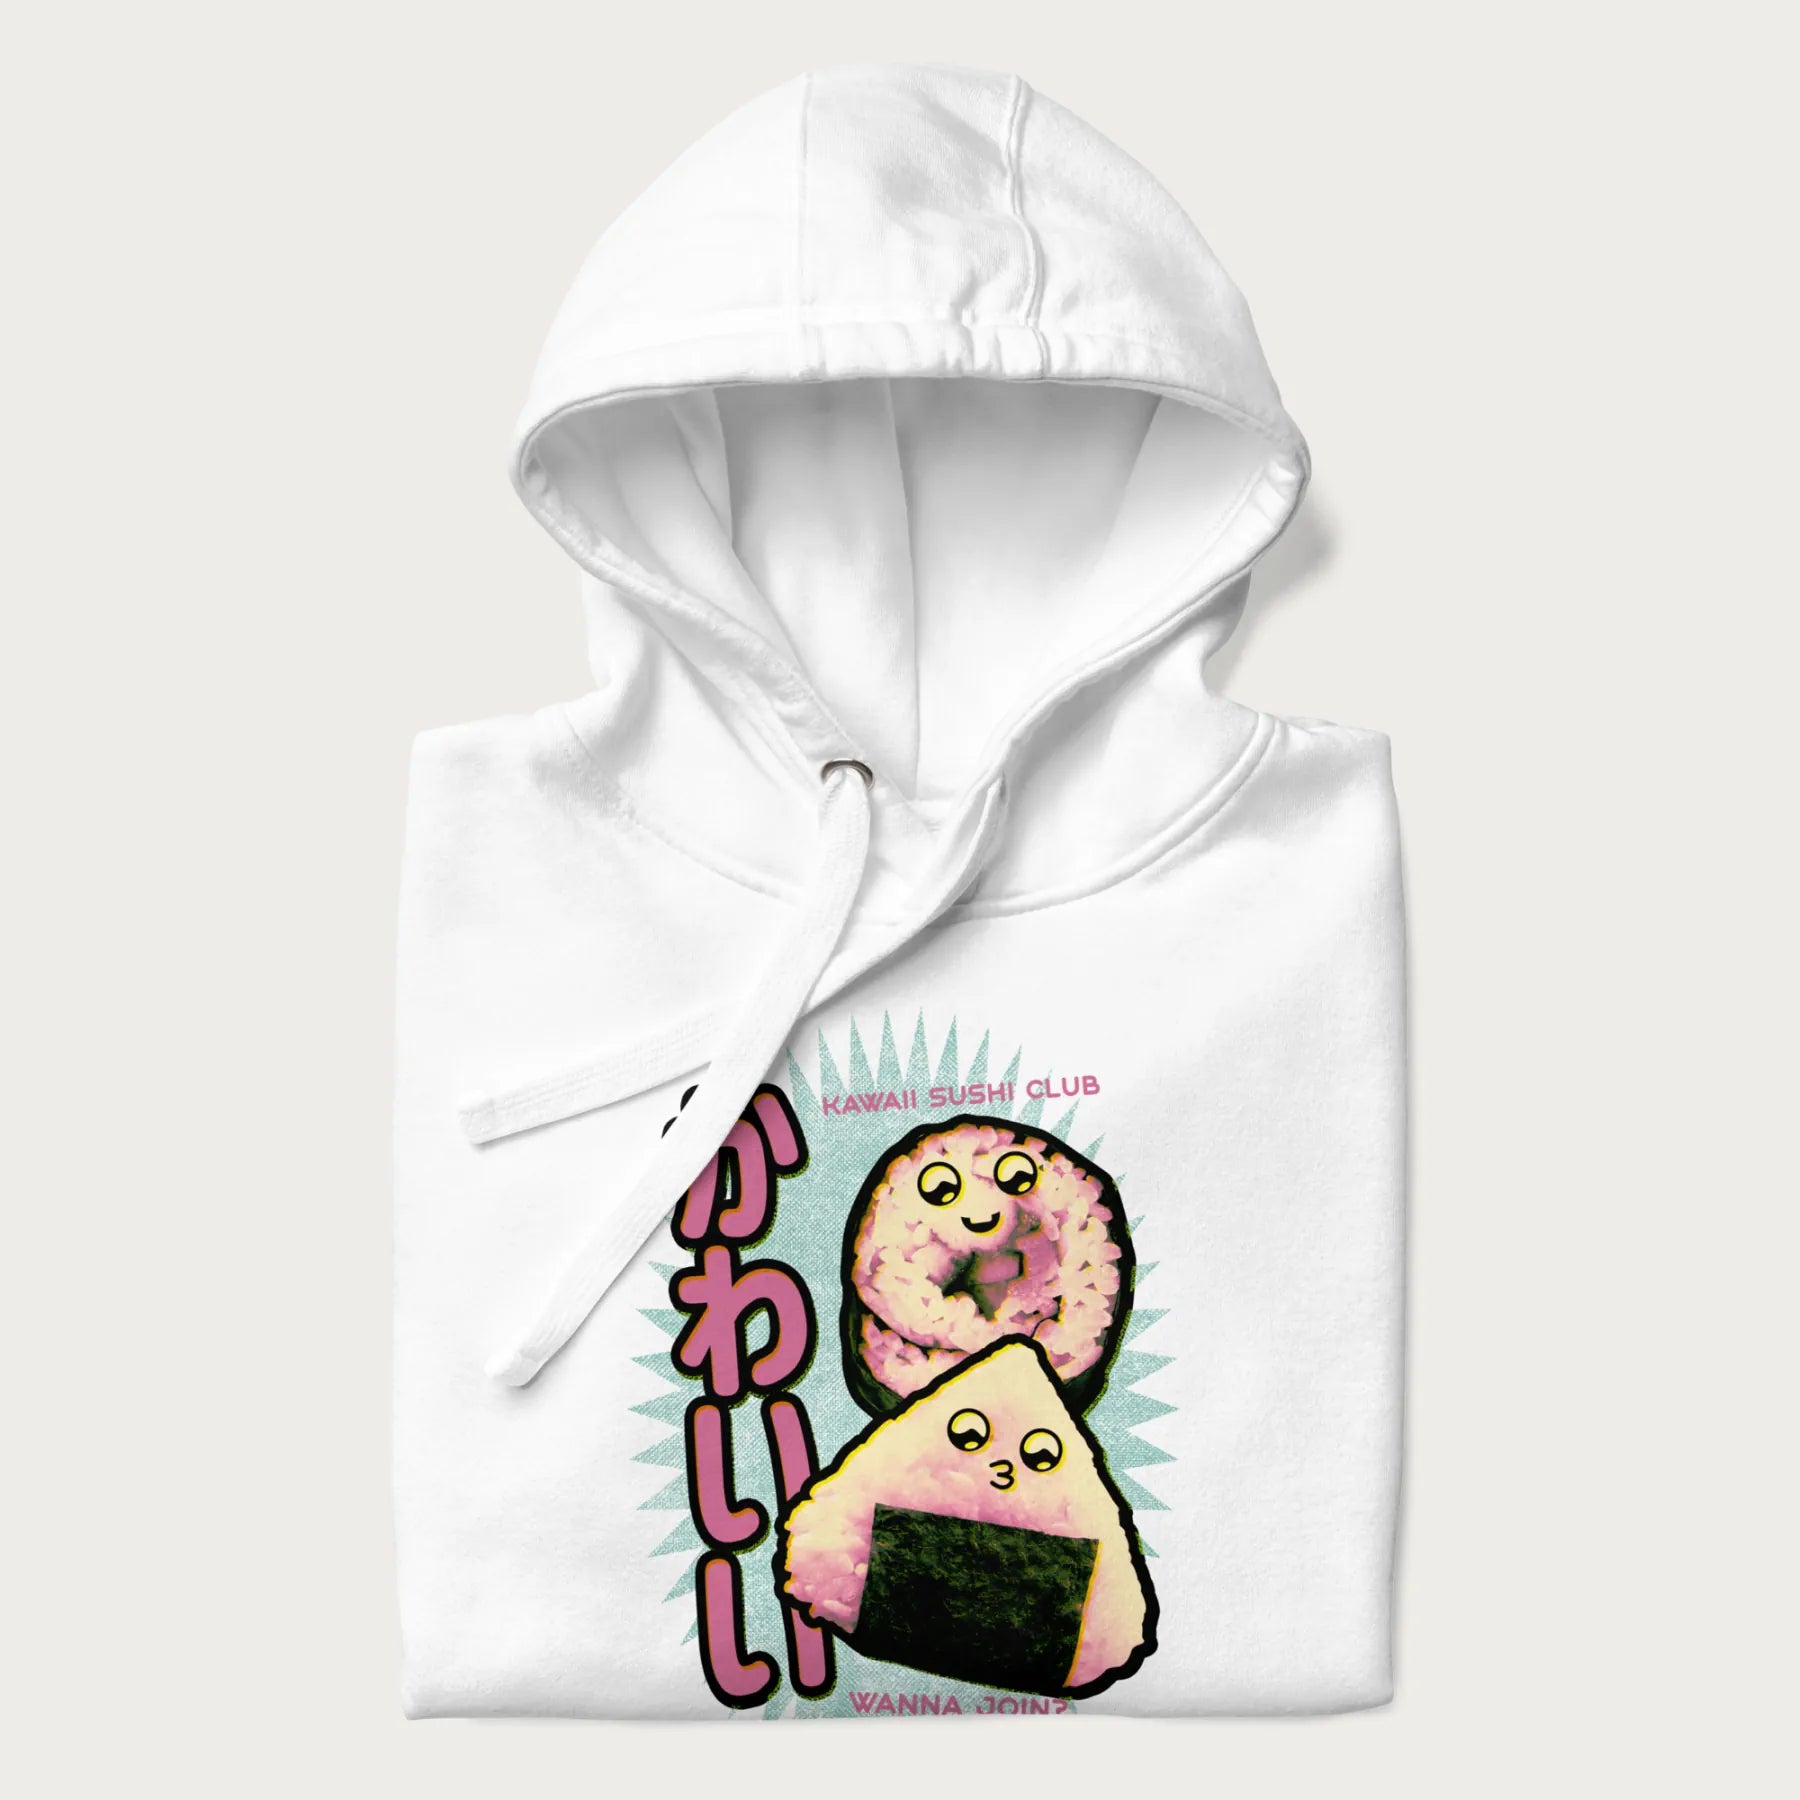 Folded white hoodie featuring a cute sushi and onigiri graphic with the text "Kawaii Sushi Club", colorful neon accents and Japanese characters.